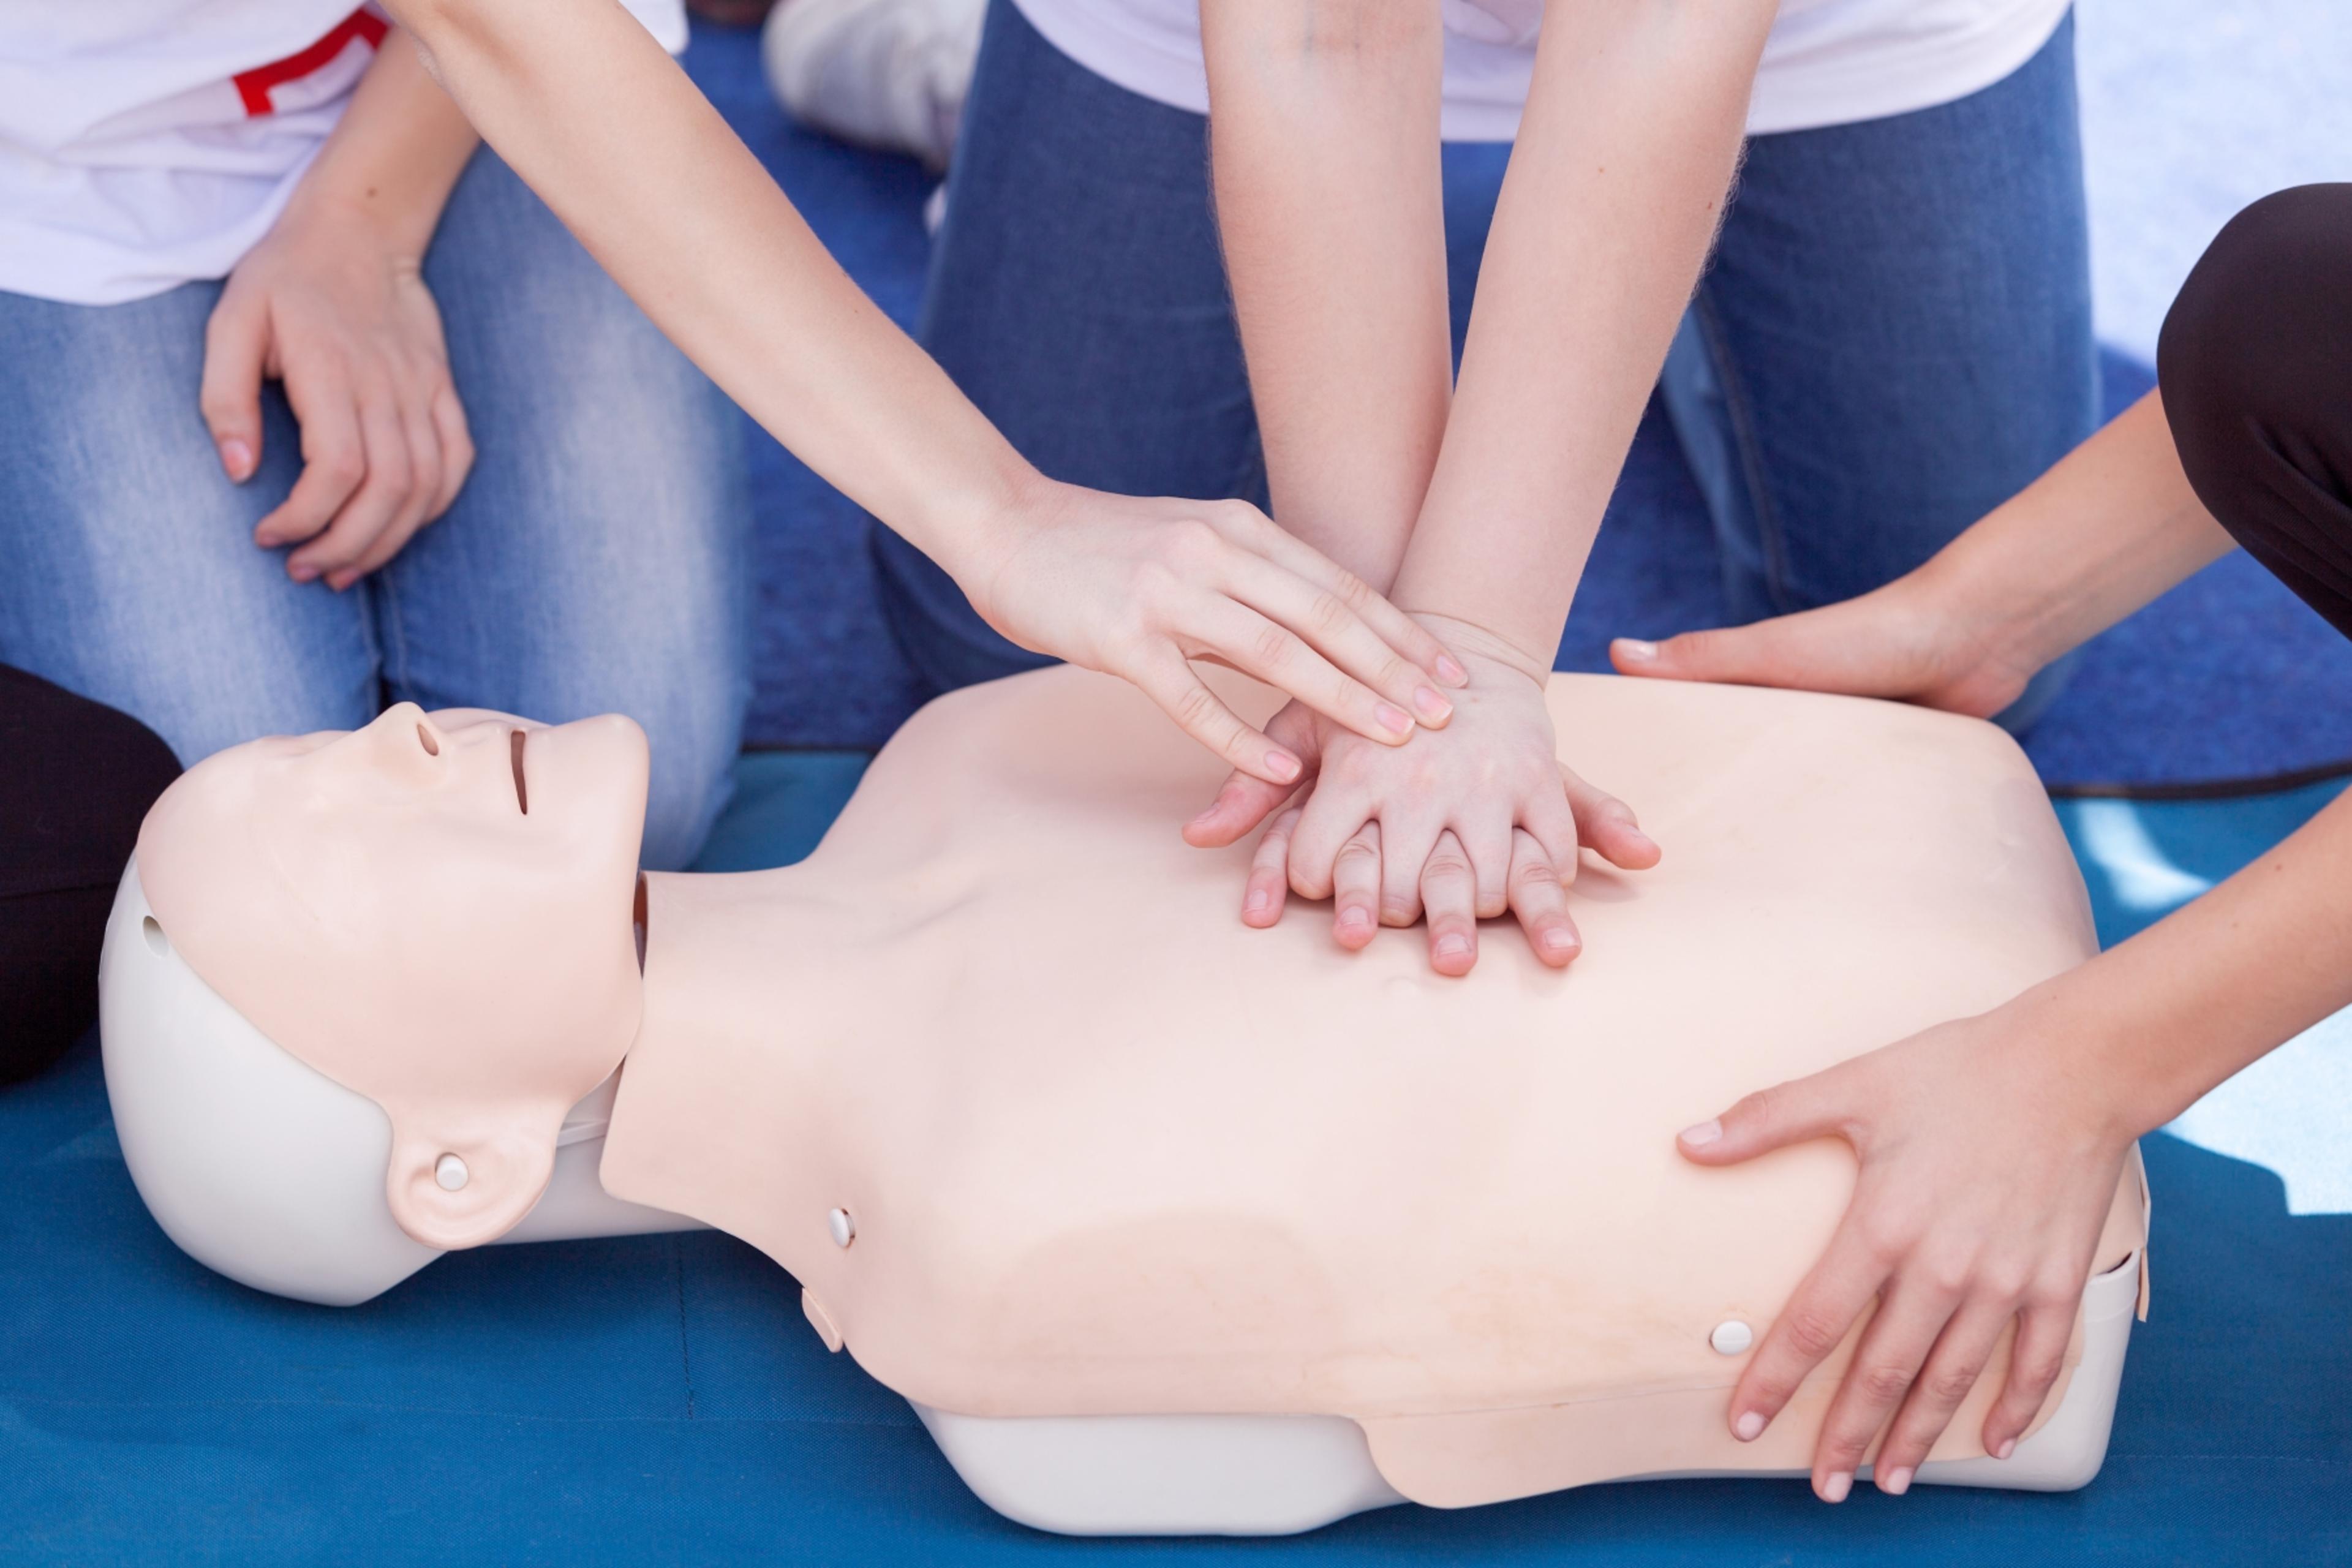 A helper places their hand in the correct position to apply pressure, in the middle of the CPR doll’s chest.